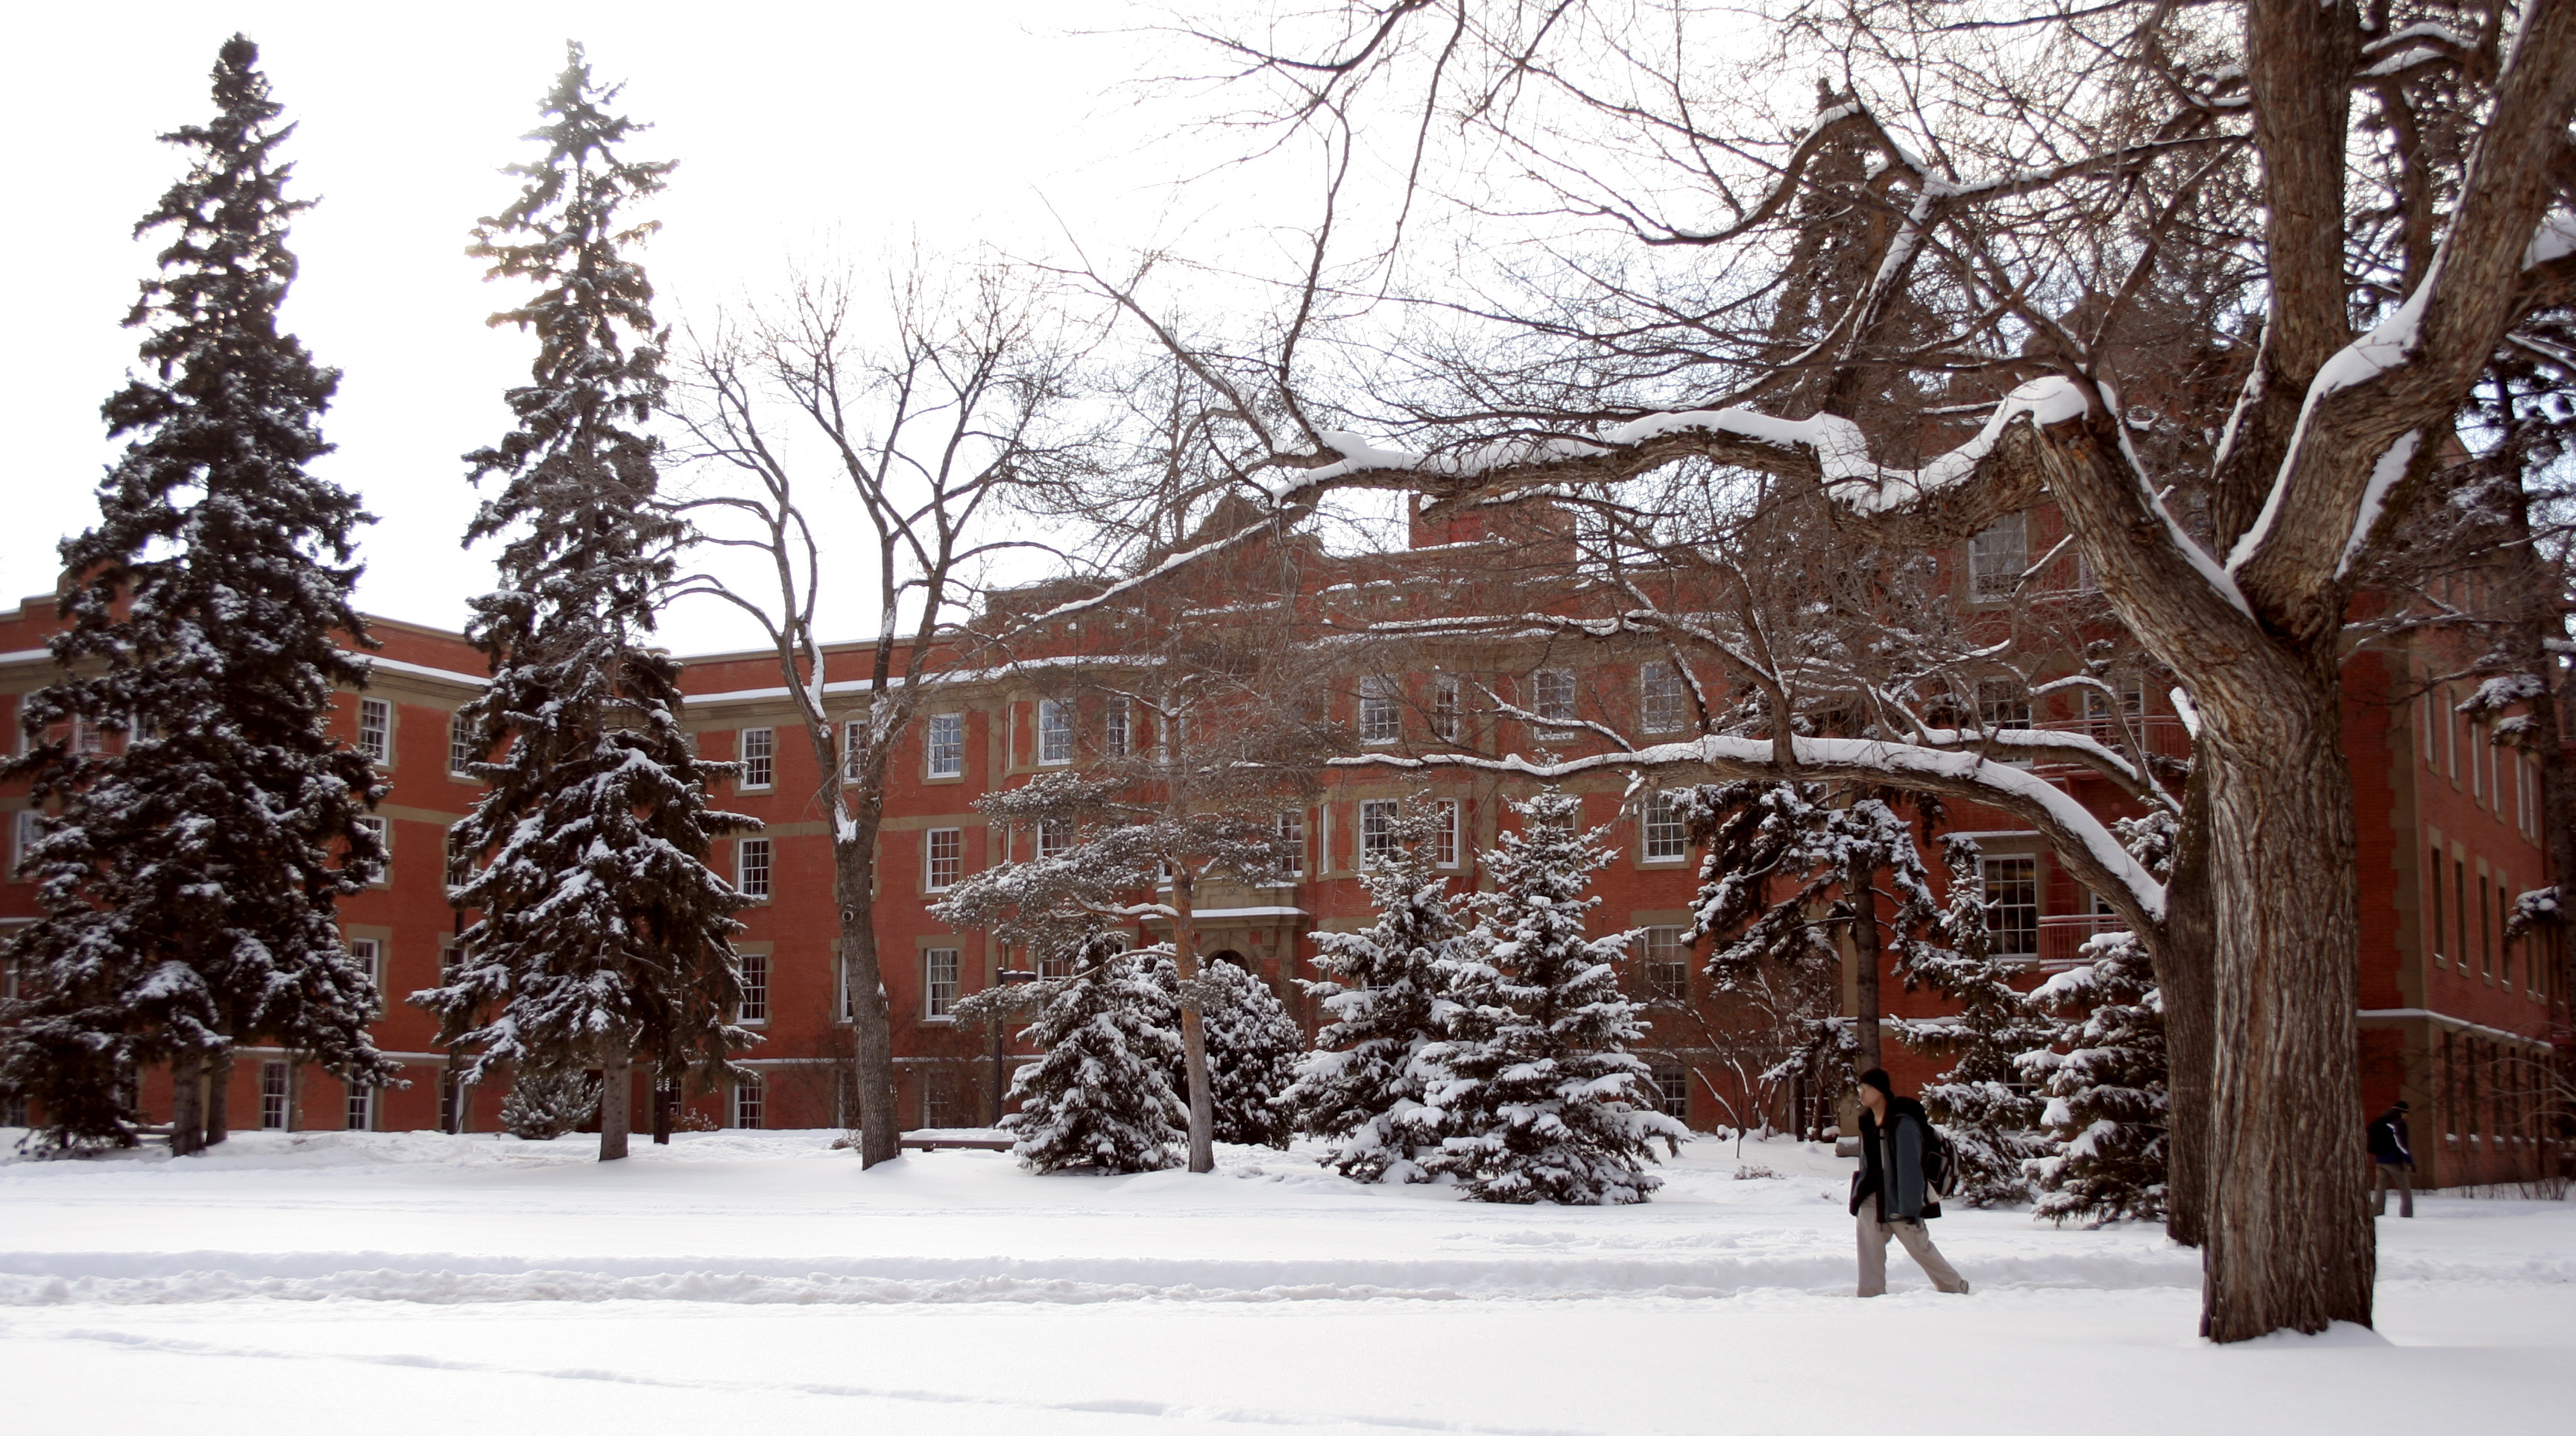 Athabasca Hall in winter